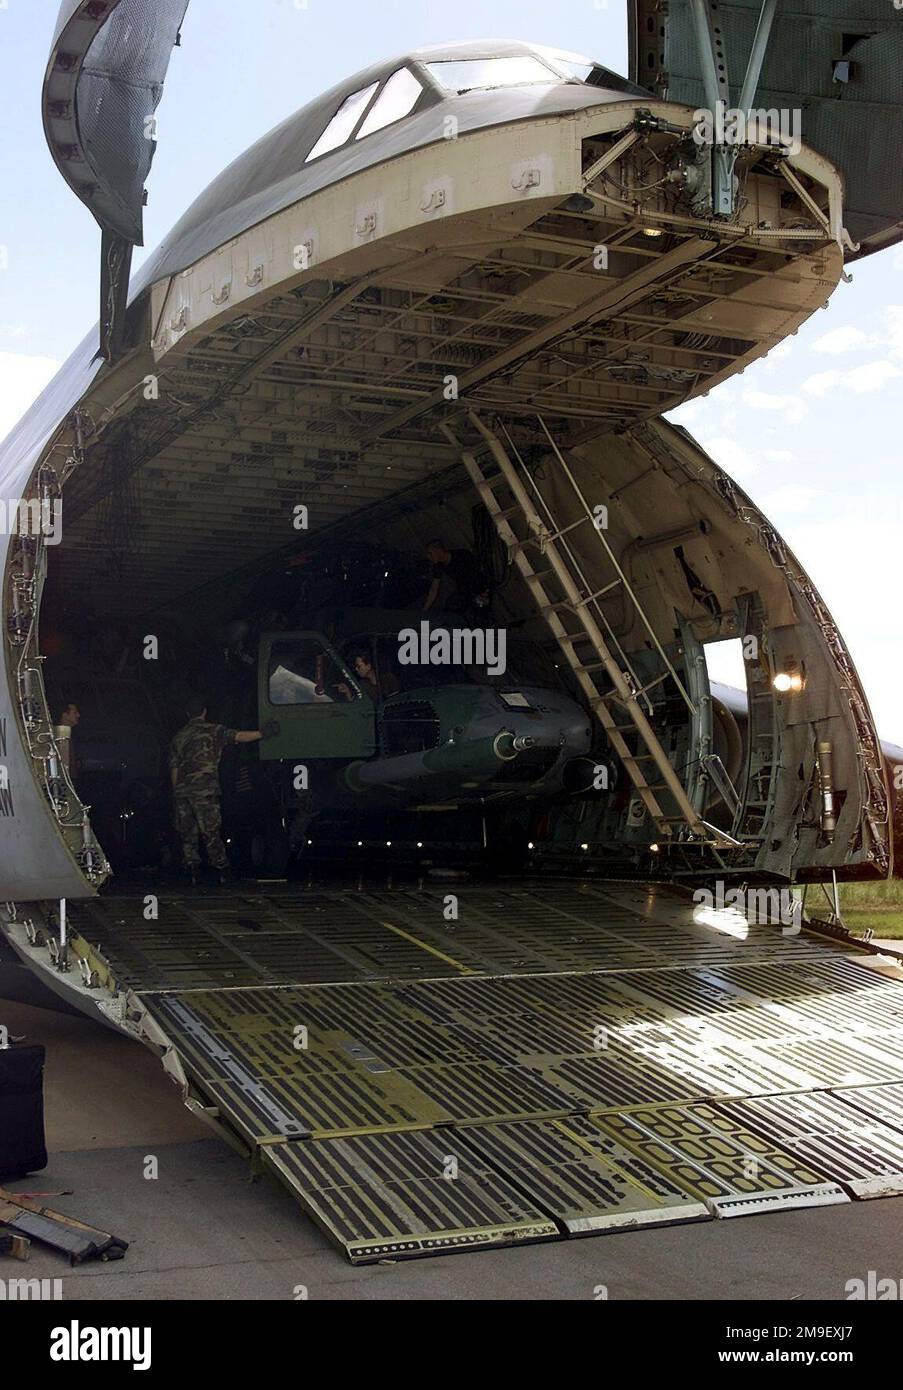 Medium shot, right front view, a parked C-5 Galaxy, nose visor raised and crago ramp extended, 436th Airlift Wing, Dover Air Force Base, Delaware, delivers a HH-60 Blackhawk, 41st Rescue Squadron, Moody AFB, Georgia, 7 March 2000, to South African Air Force Base Hoedspruit during Operation 'ATLAS RESPONSE'. The helicopter is the first delivered to aid in distribution of relief supplies and to be used in rescue operations for stranded flood victims in Mozambique. (Duplicate image, see also DF-SD-01-05897 or search 000307-F-5772H-503). Subject Operation/Series: ATLAS RESPONSE Base: Hoedspruit Ai Stock Photo